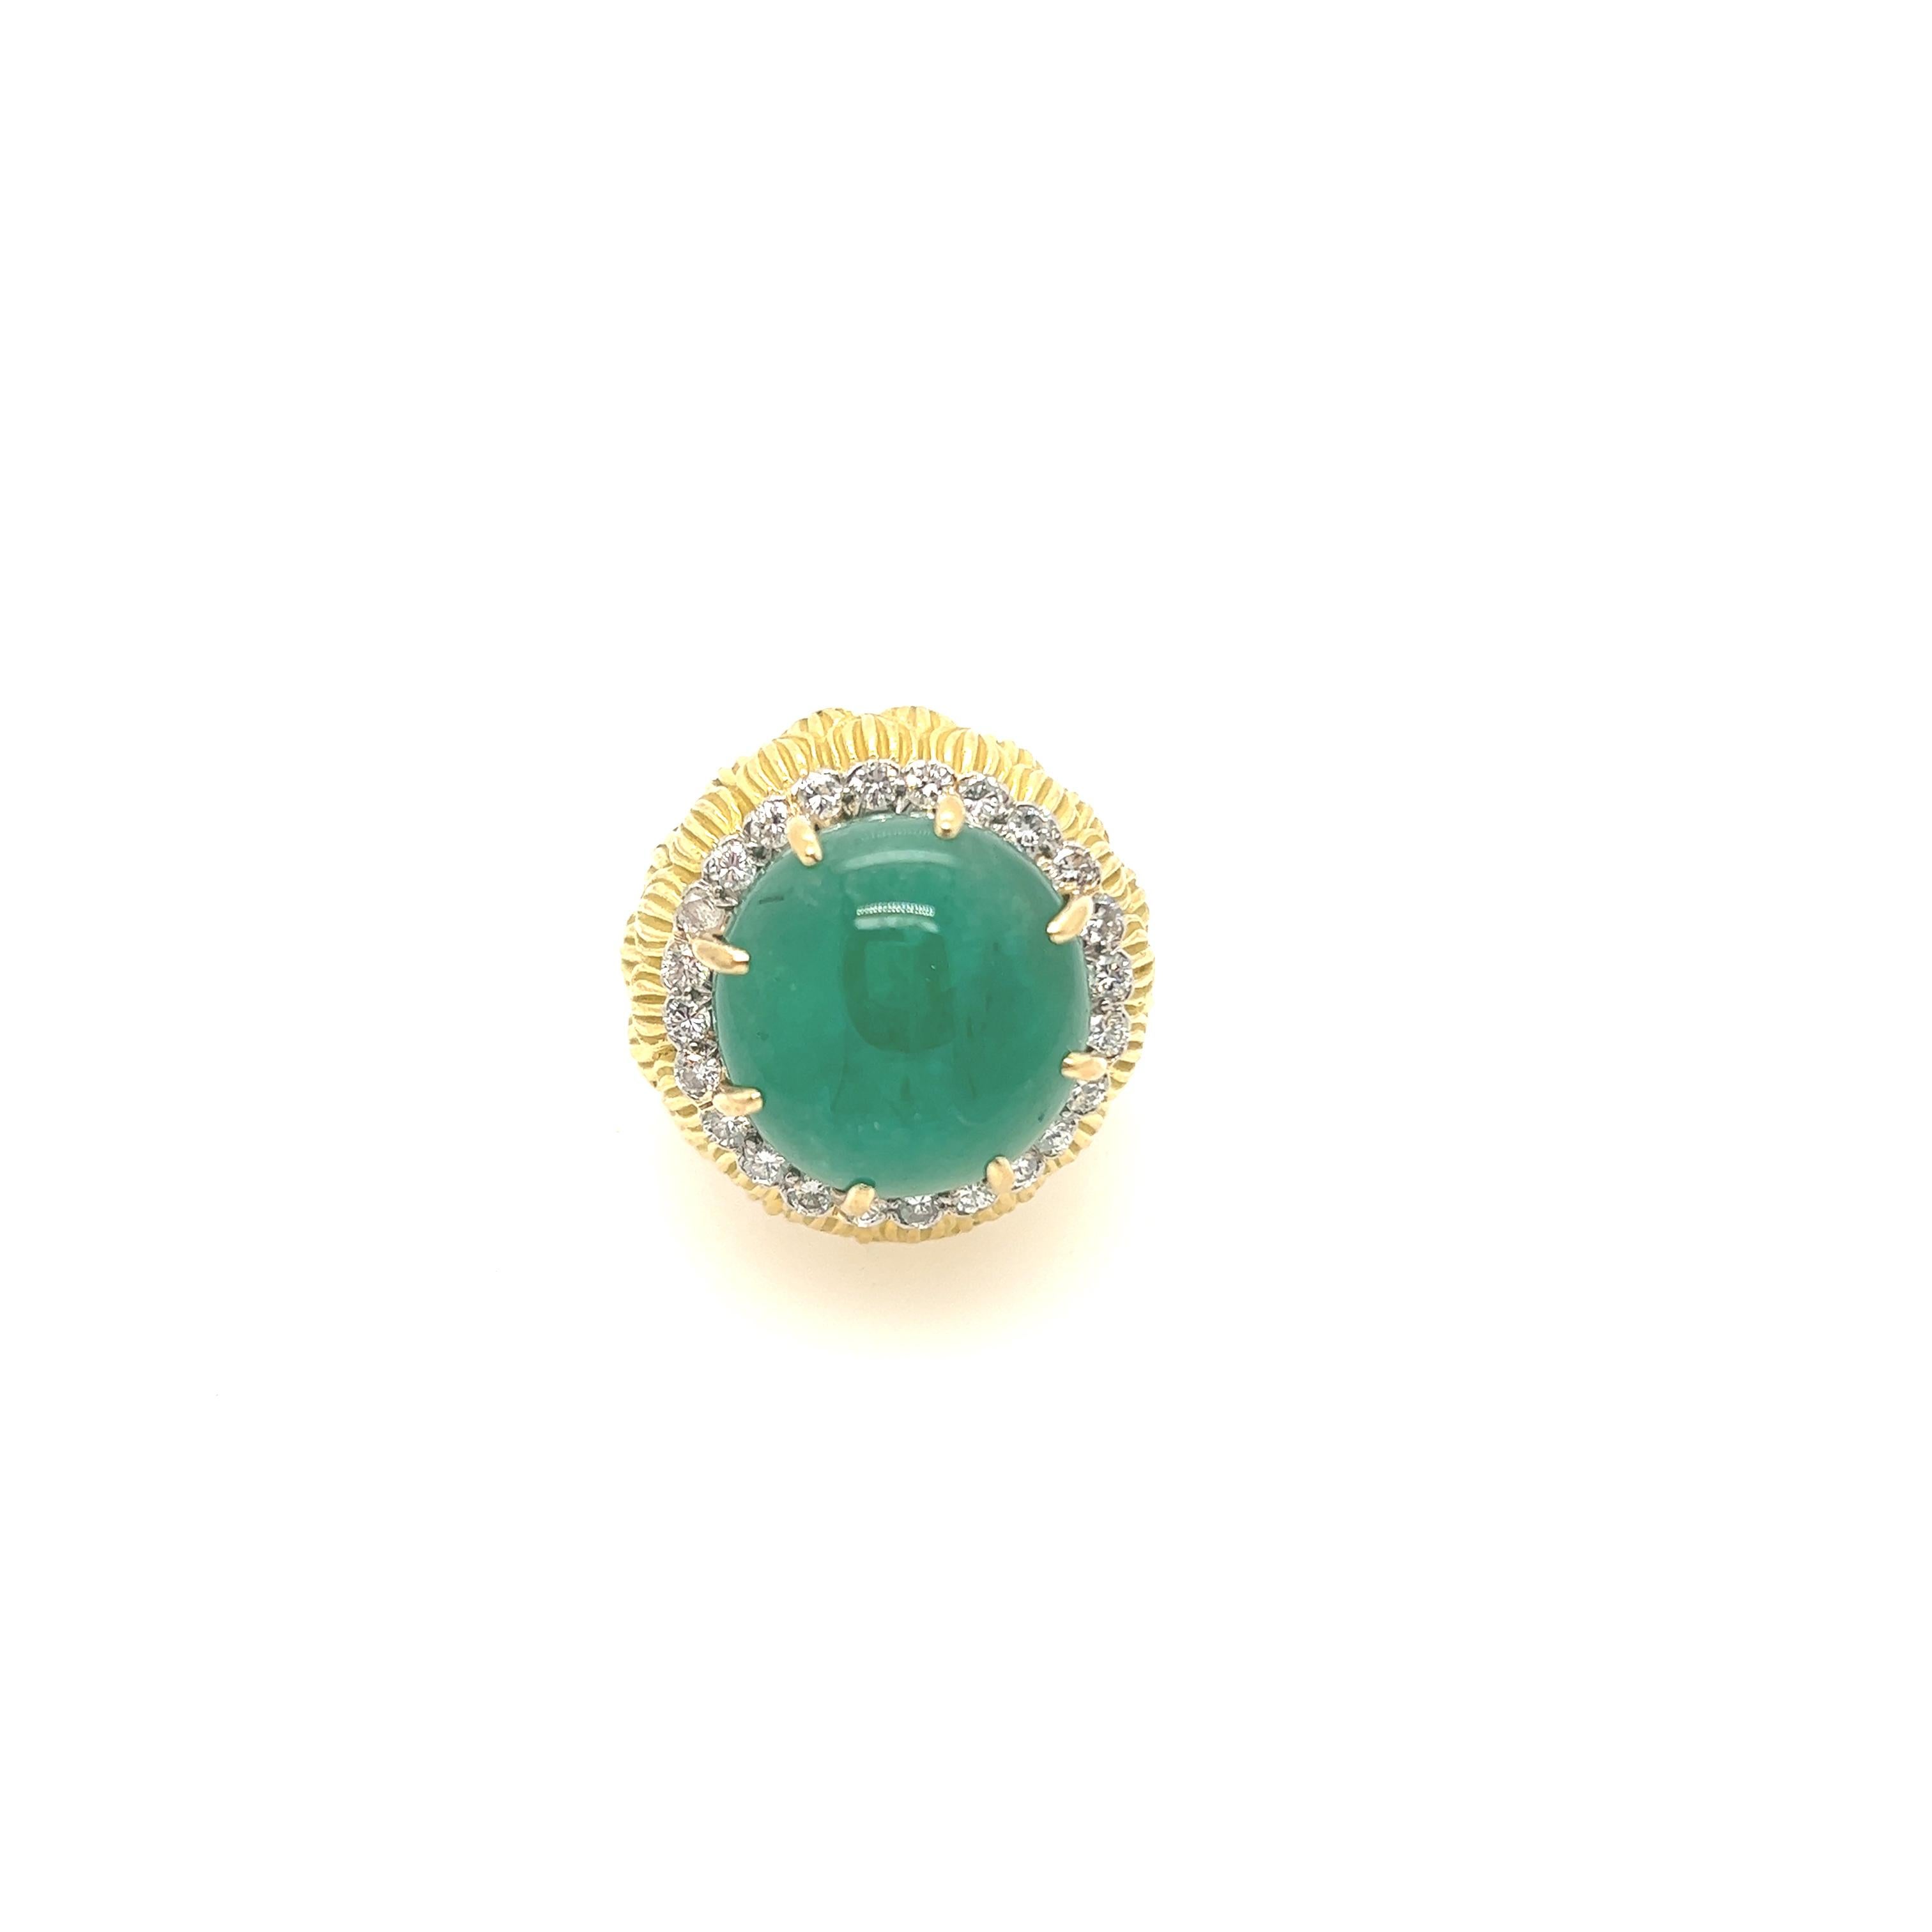 This is one of the most stunning Rare David Webb ring from the 1970's featuring a 24.76ct cabochon emerald surrounded by 1.02cts of diamonds in a fabulous 18kt yellow gold leaf setting. The ring is stamped Webb and does a have an interior guard.
You